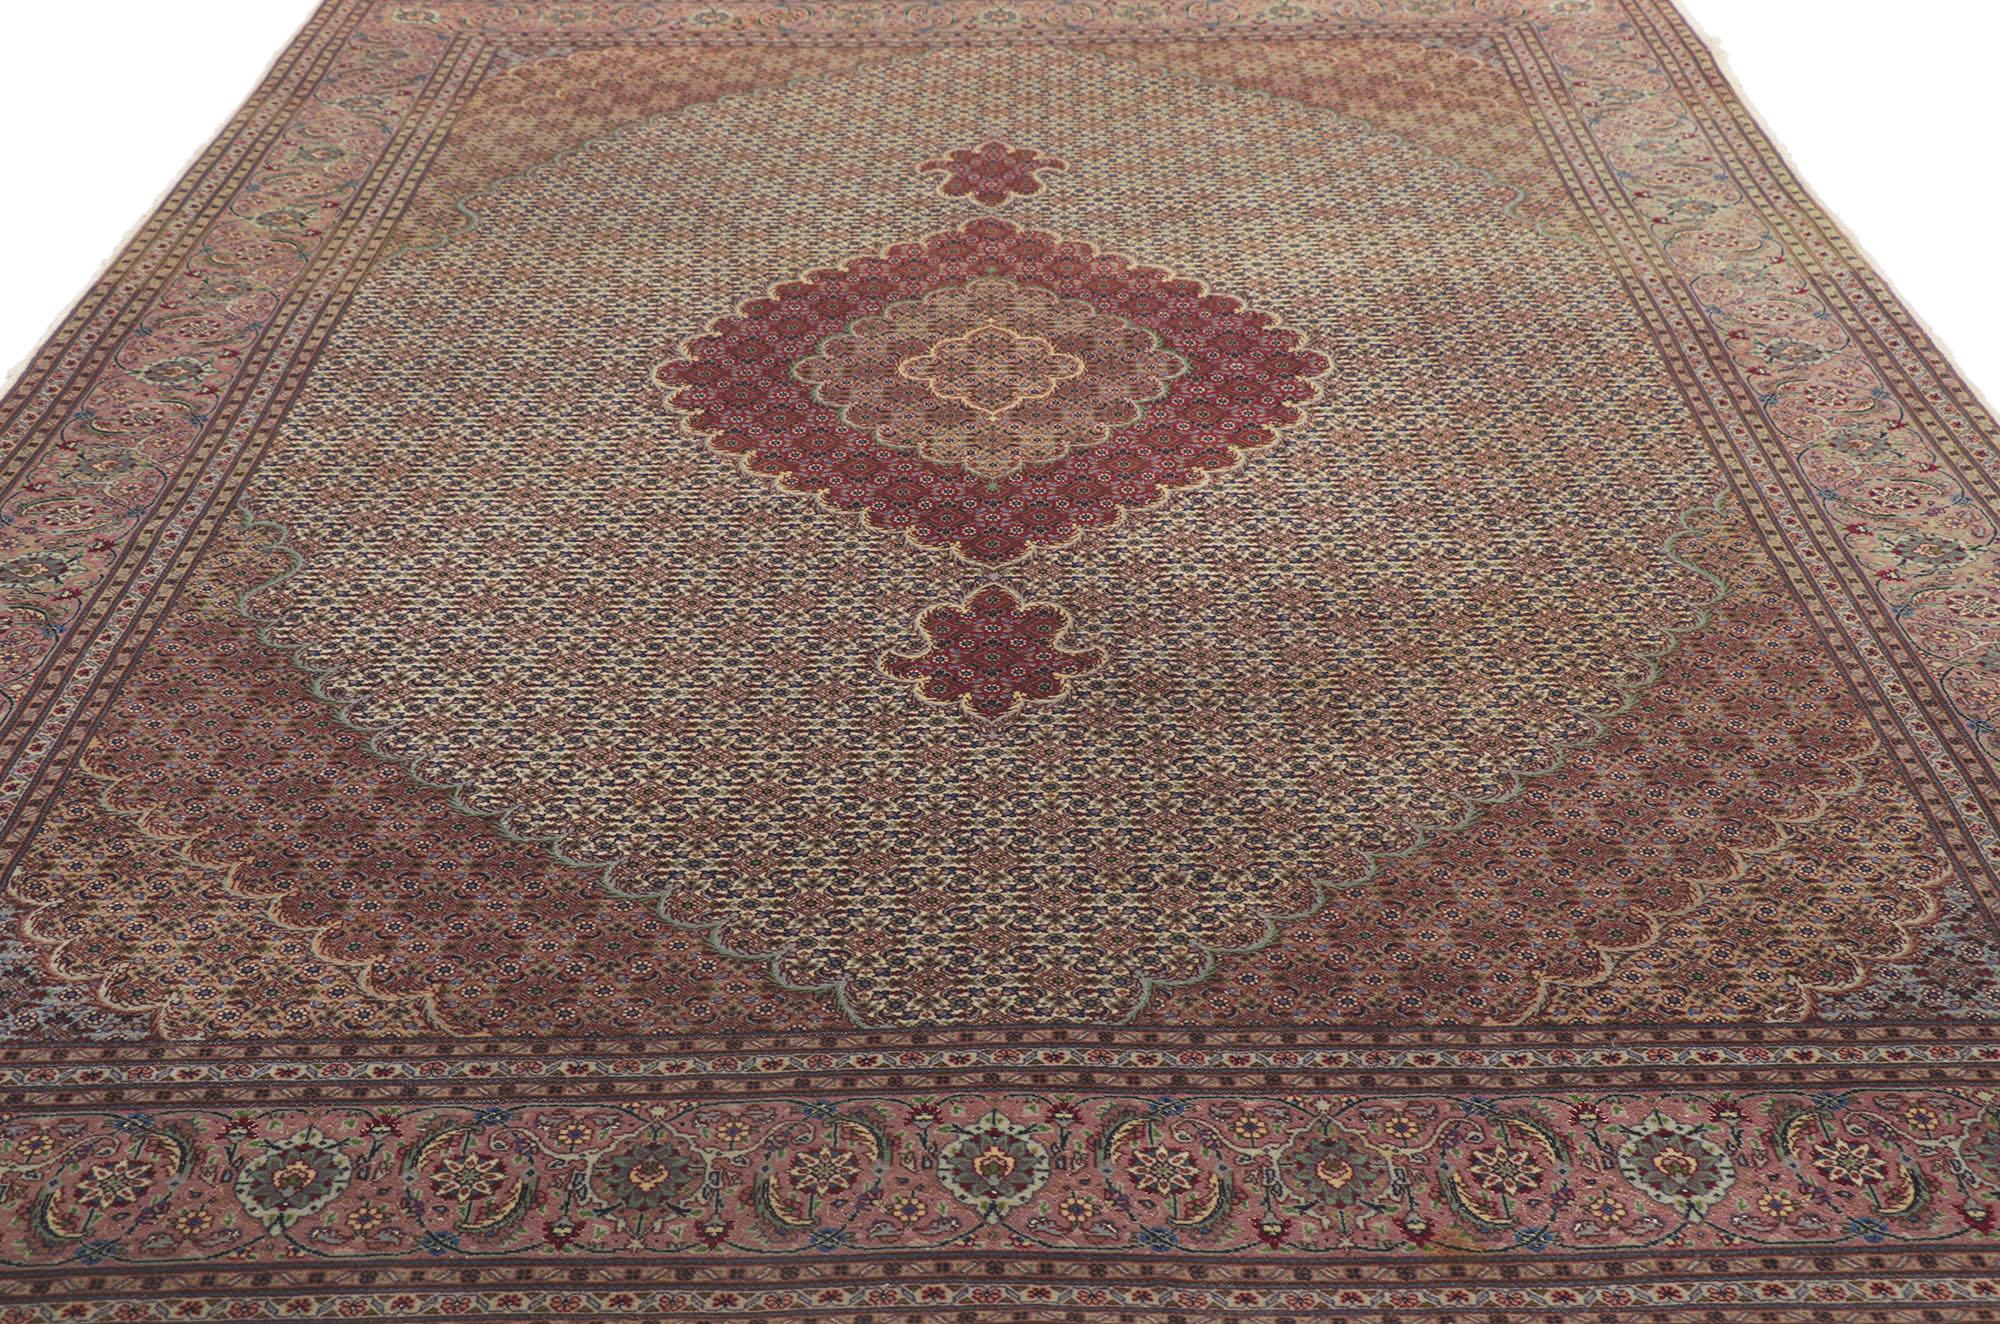 Vintage Persian Mahi Tabriz Rug, Timeless Elegance Meets Historical Richness In Good Condition For Sale In Dallas, TX